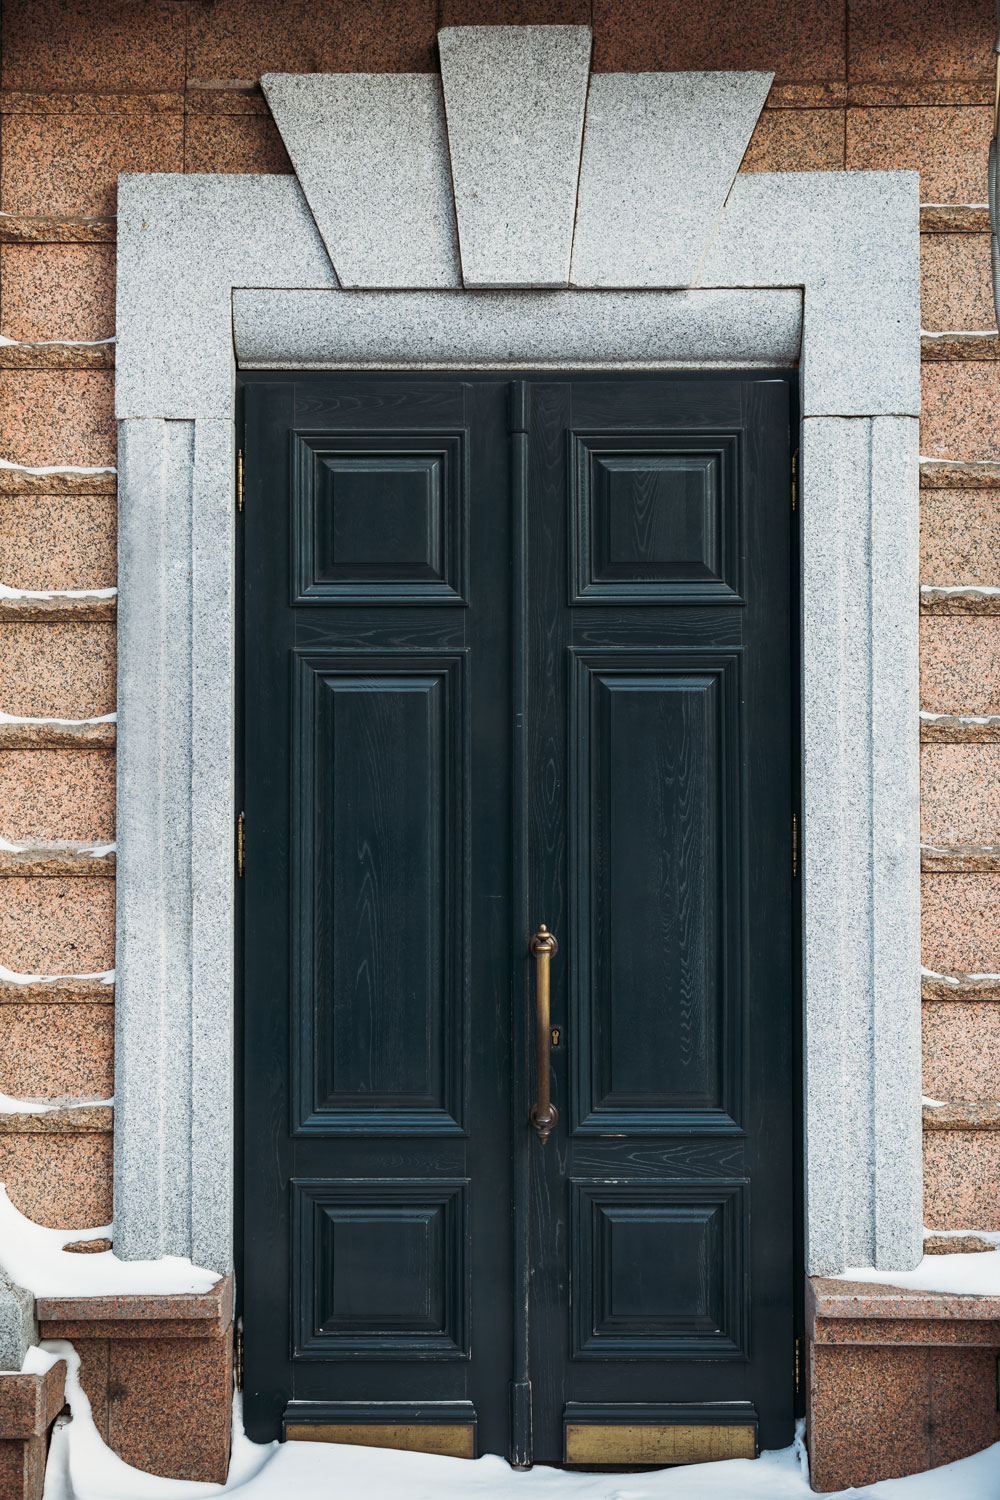 A black French door with a concrete trim